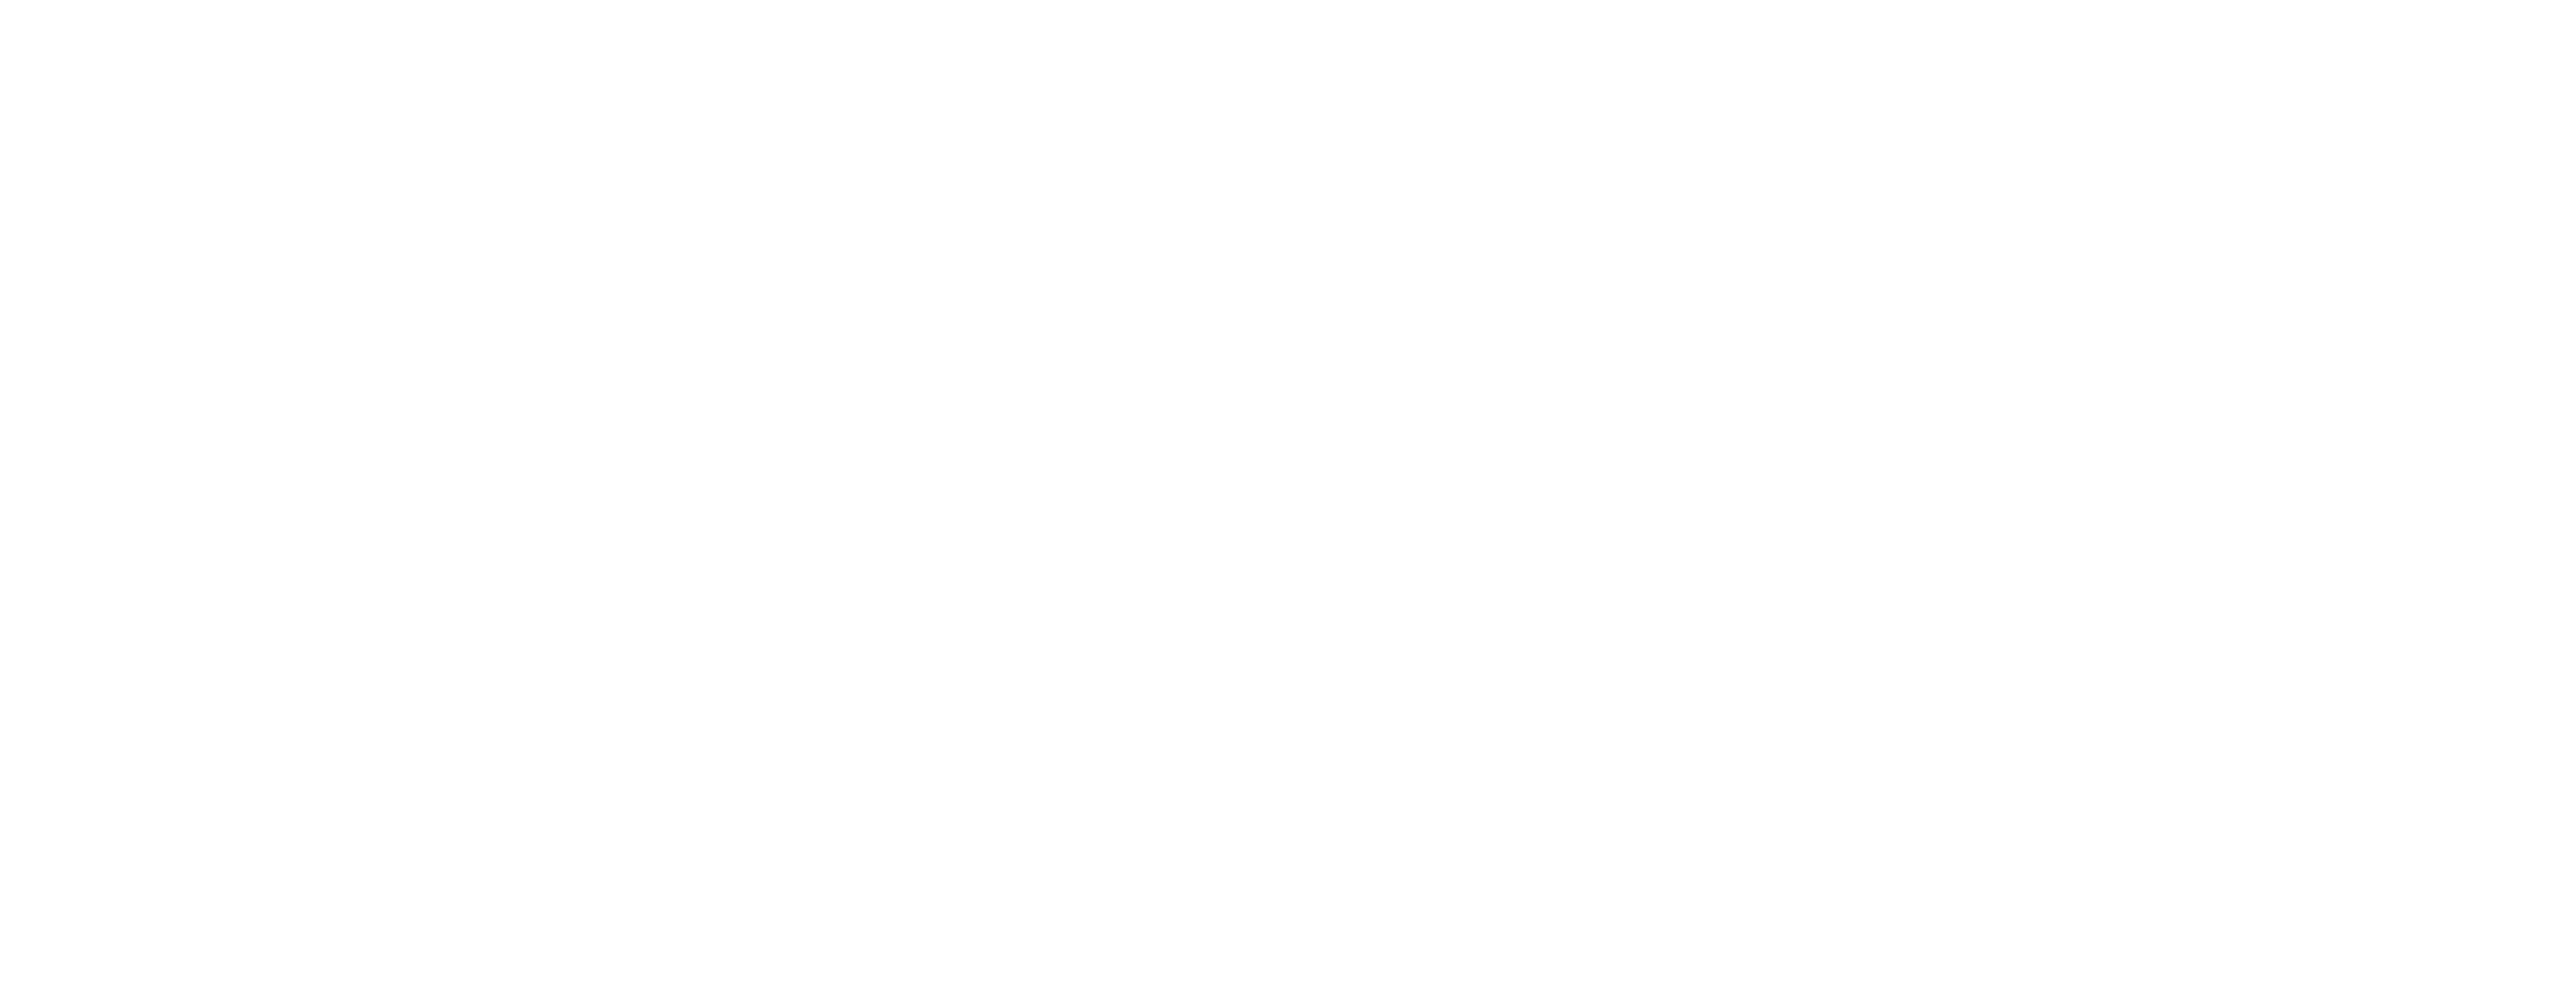 The Outlook Africa